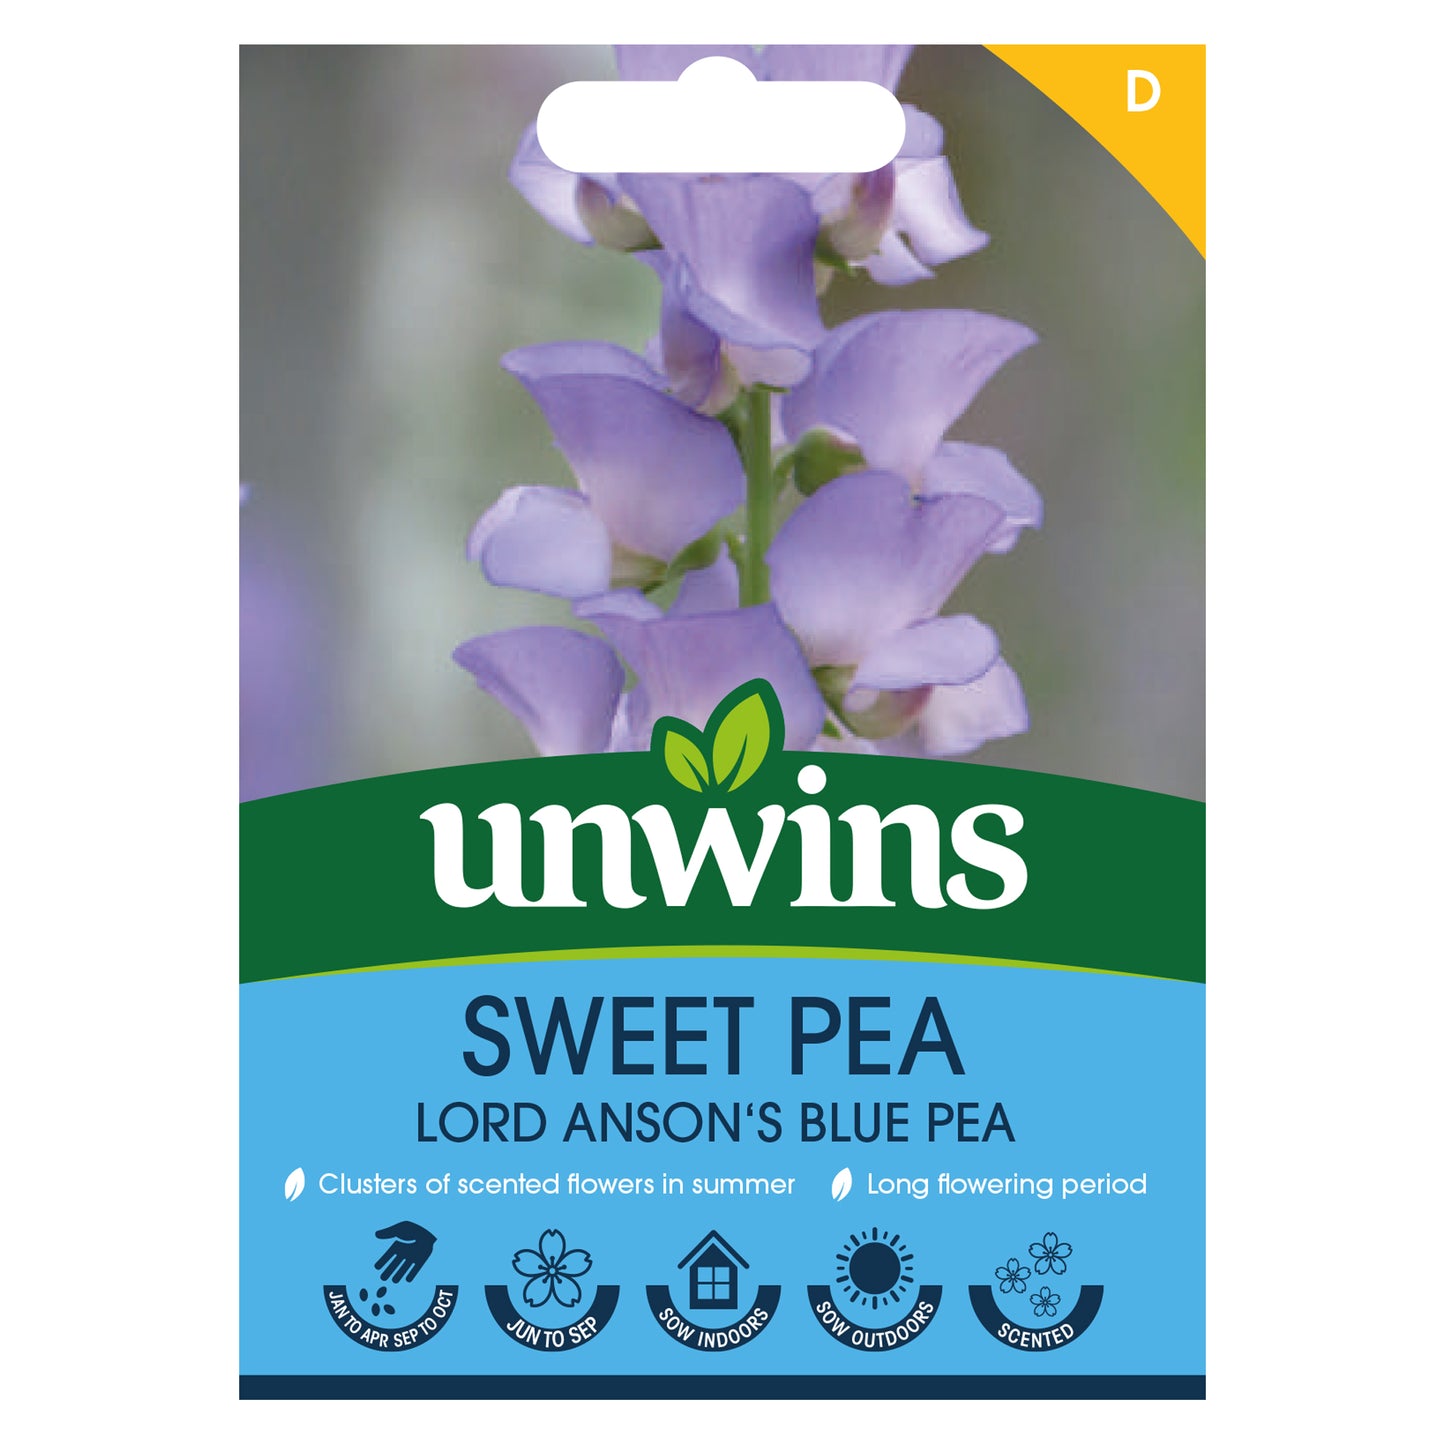 Unwins Sweet Pea Lord Anson's Blue Pea Seeds front of pack